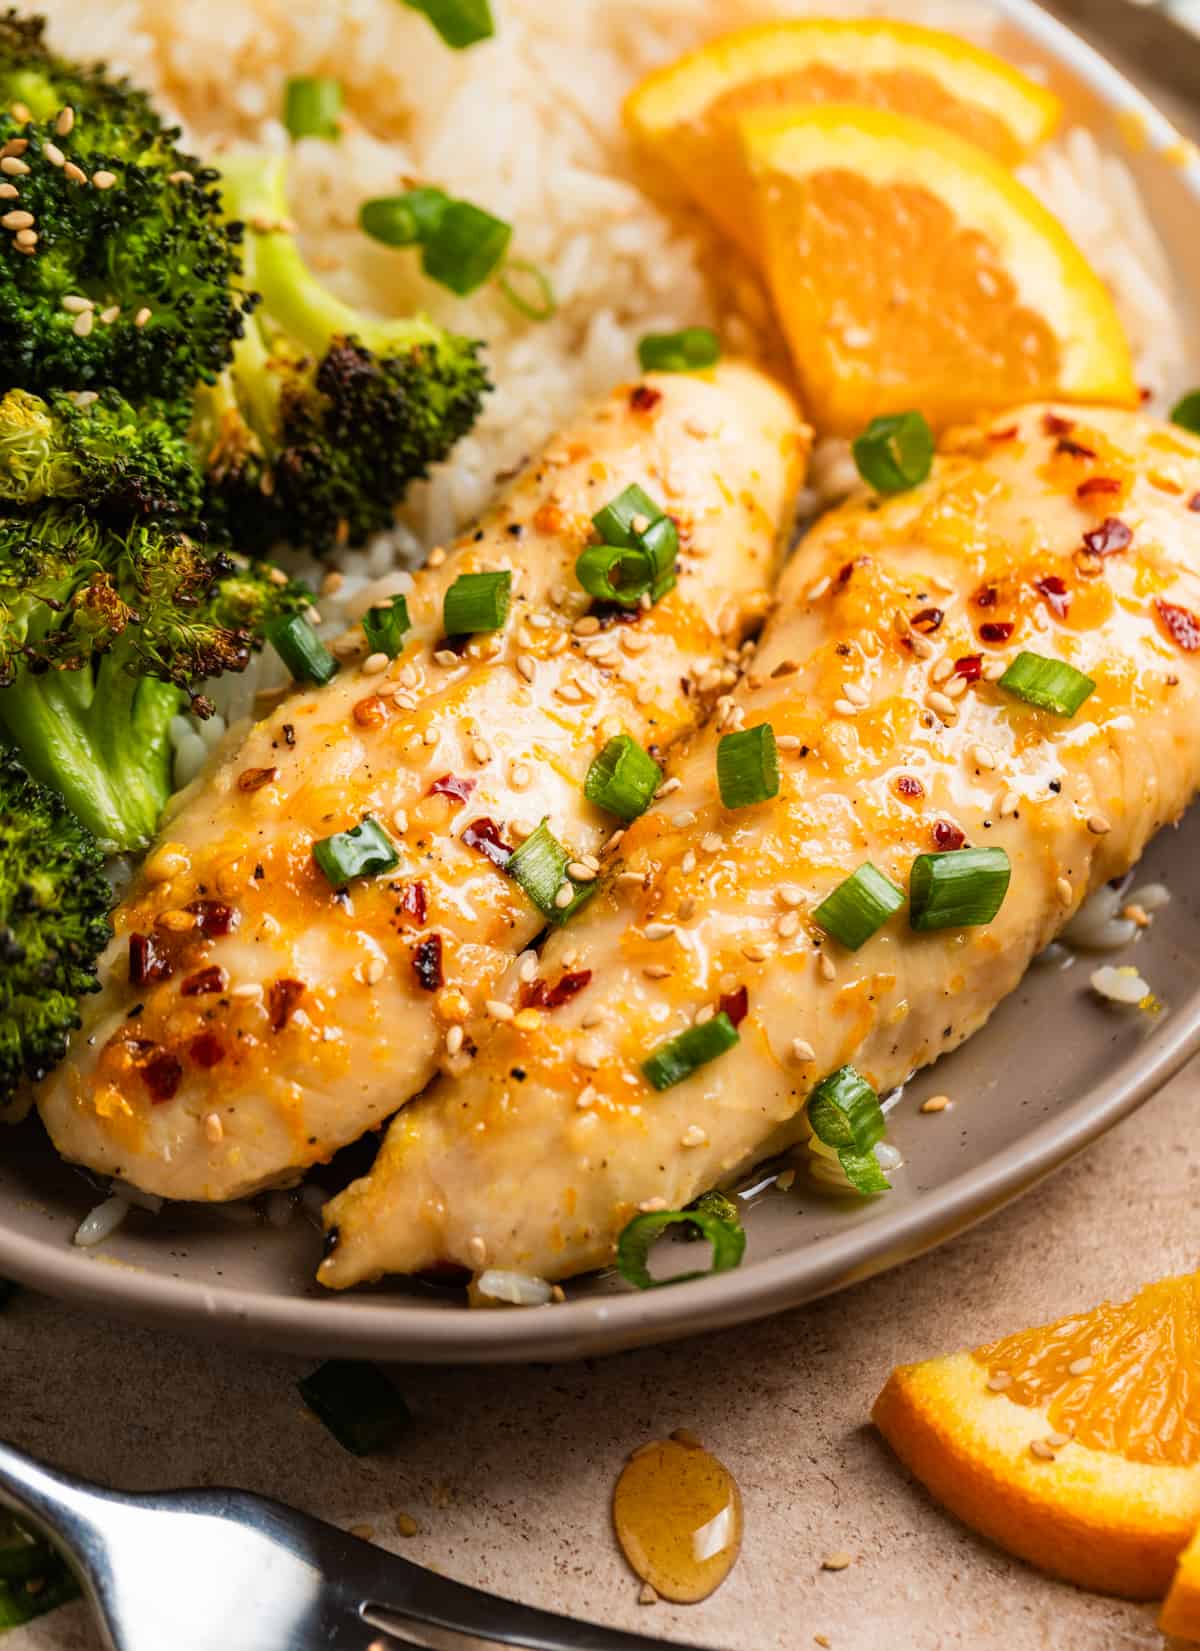 Dish with baked orange chicken, broccoli and rice topped with sliced green onions and sesame seeds.